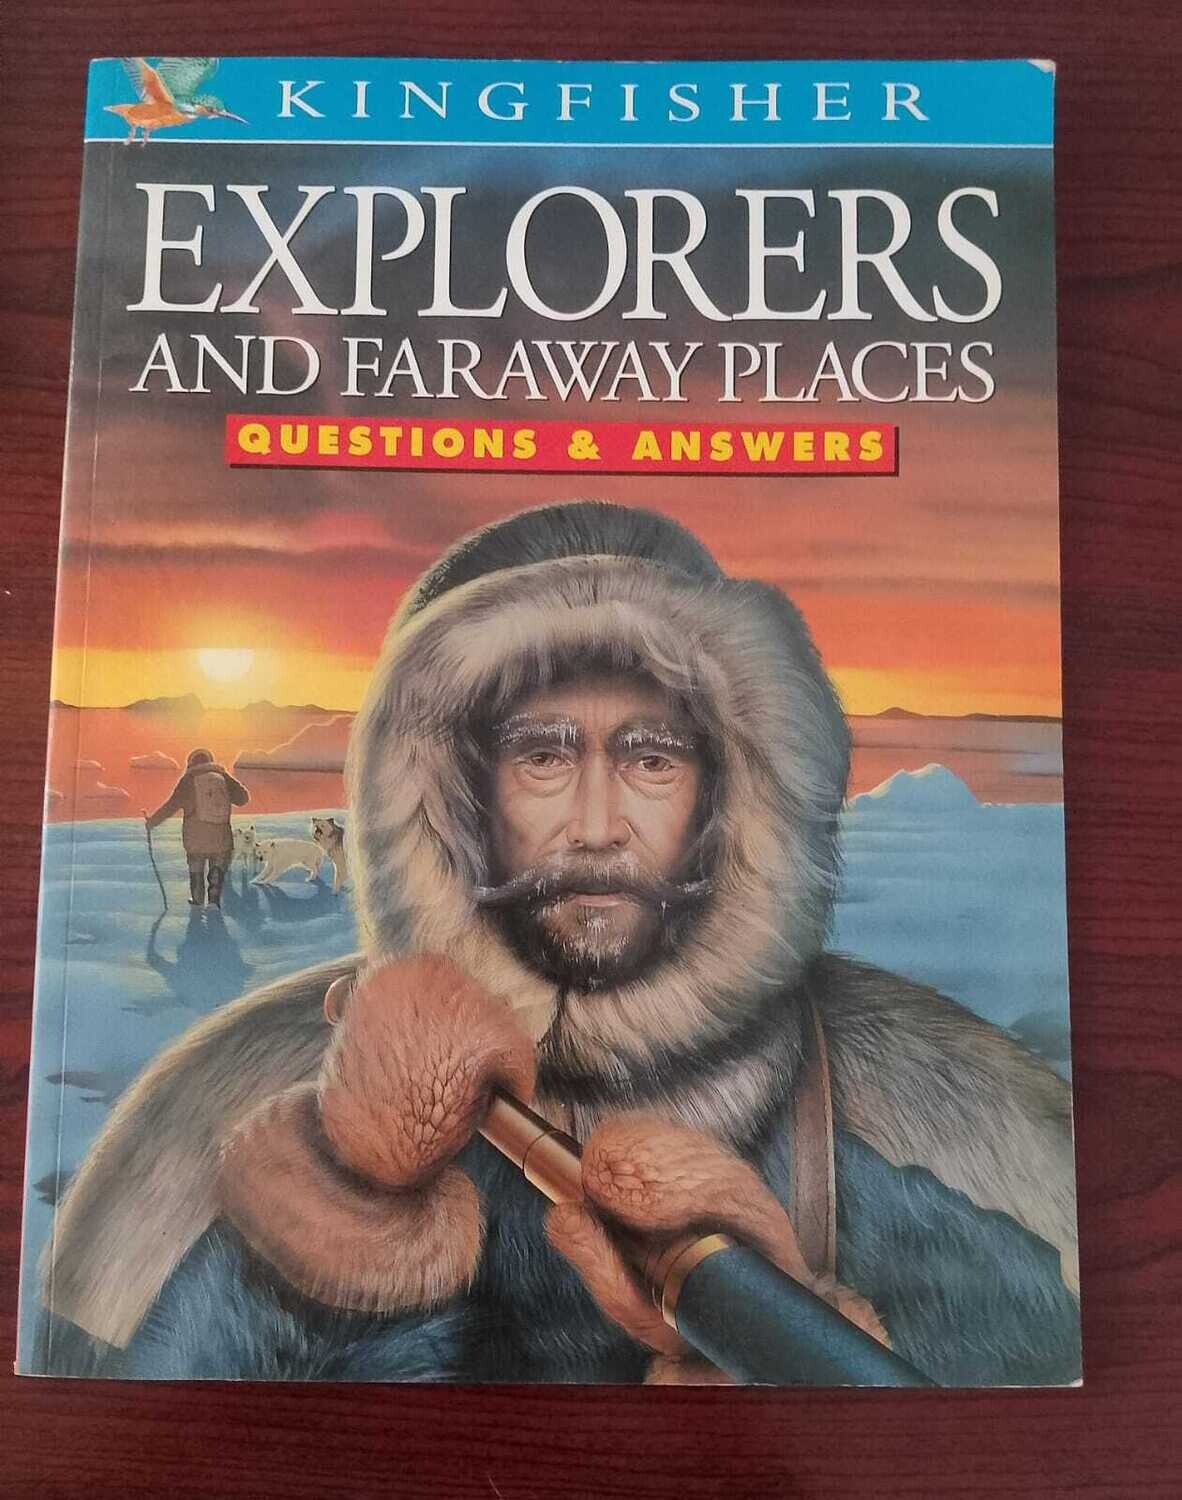 EXPLORERS AND FARAWAY PLACES